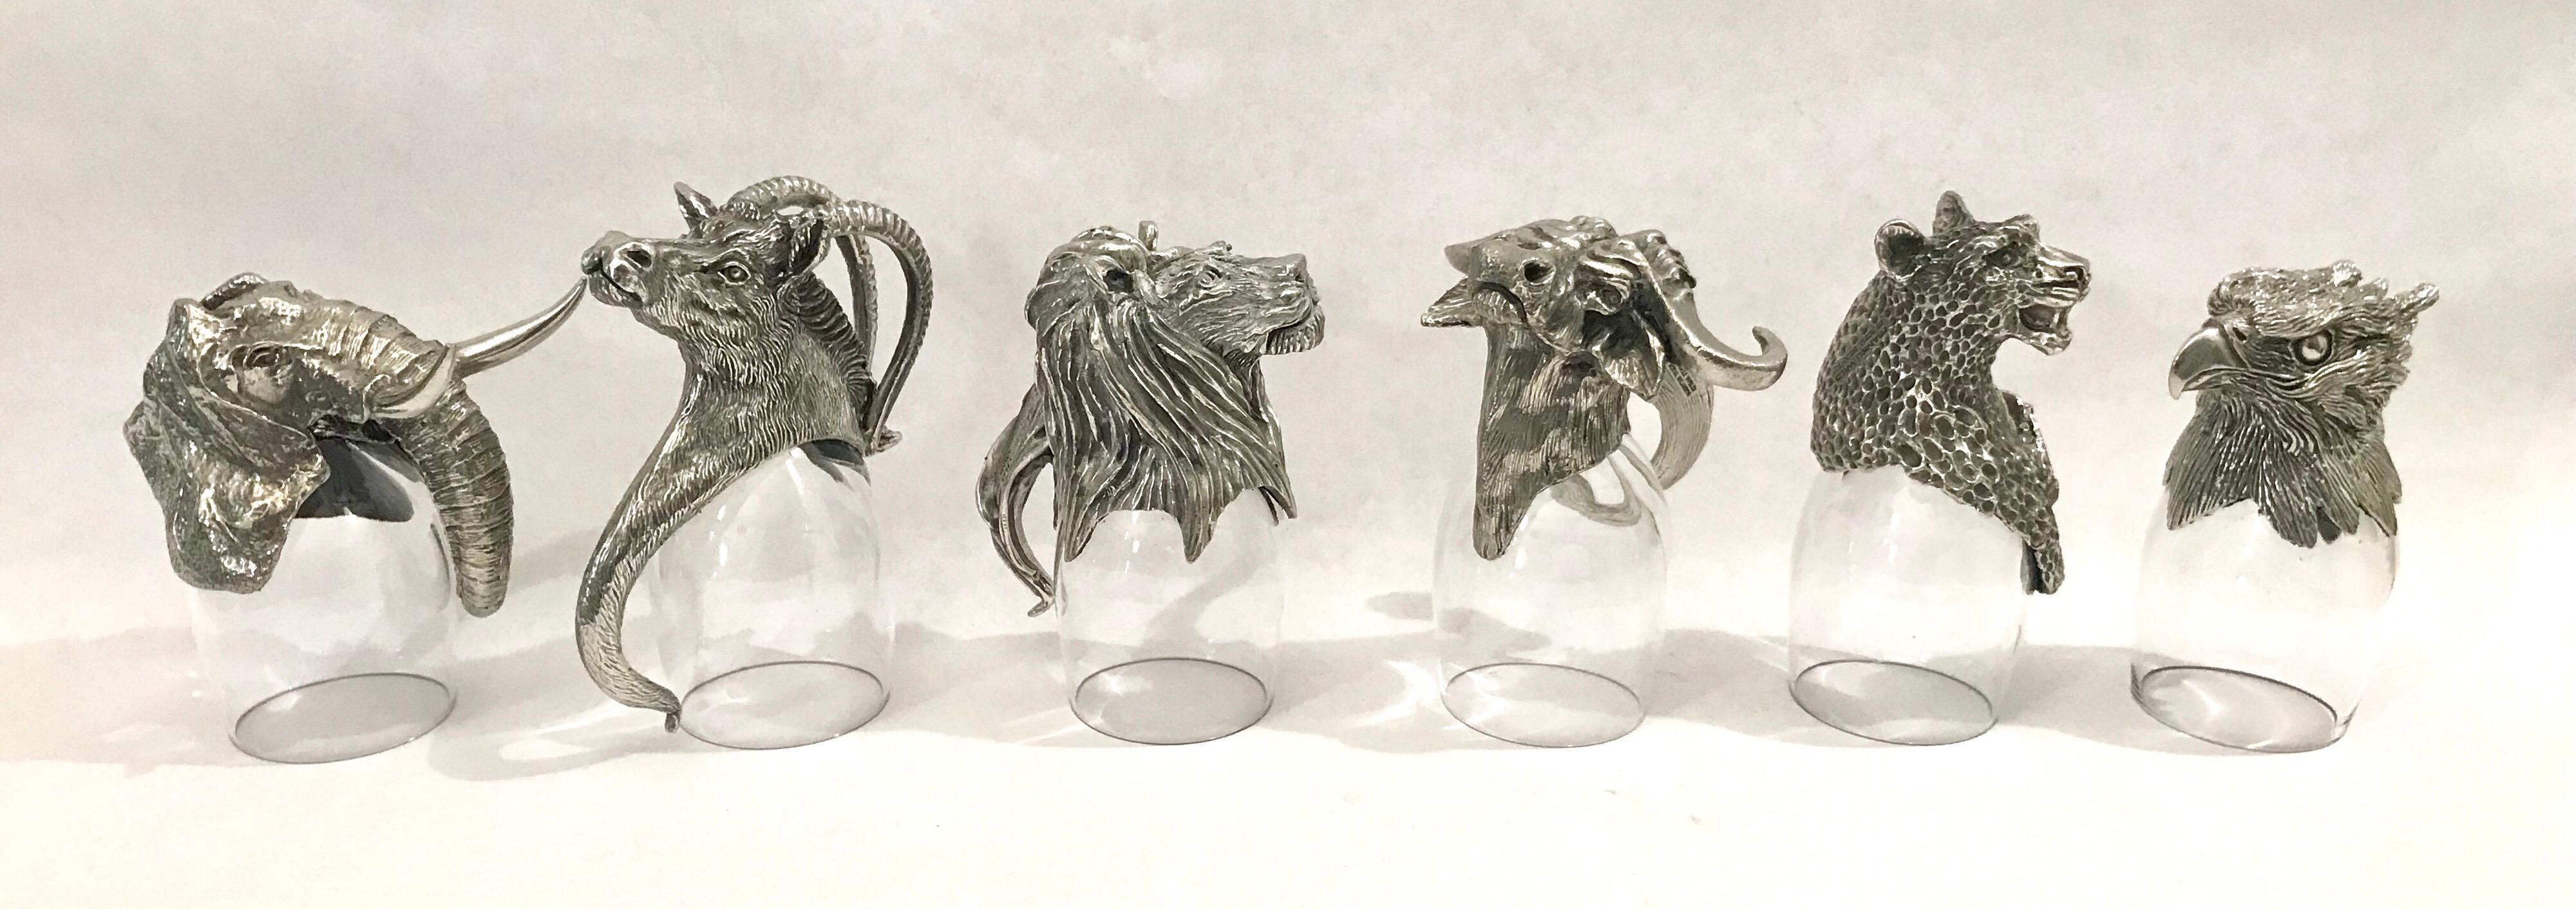 Set of six cast pewter animal form shot glasses designed by Frankli Wild for Royal Selangor.

Size in the measurement description field is of the largest shot glass.